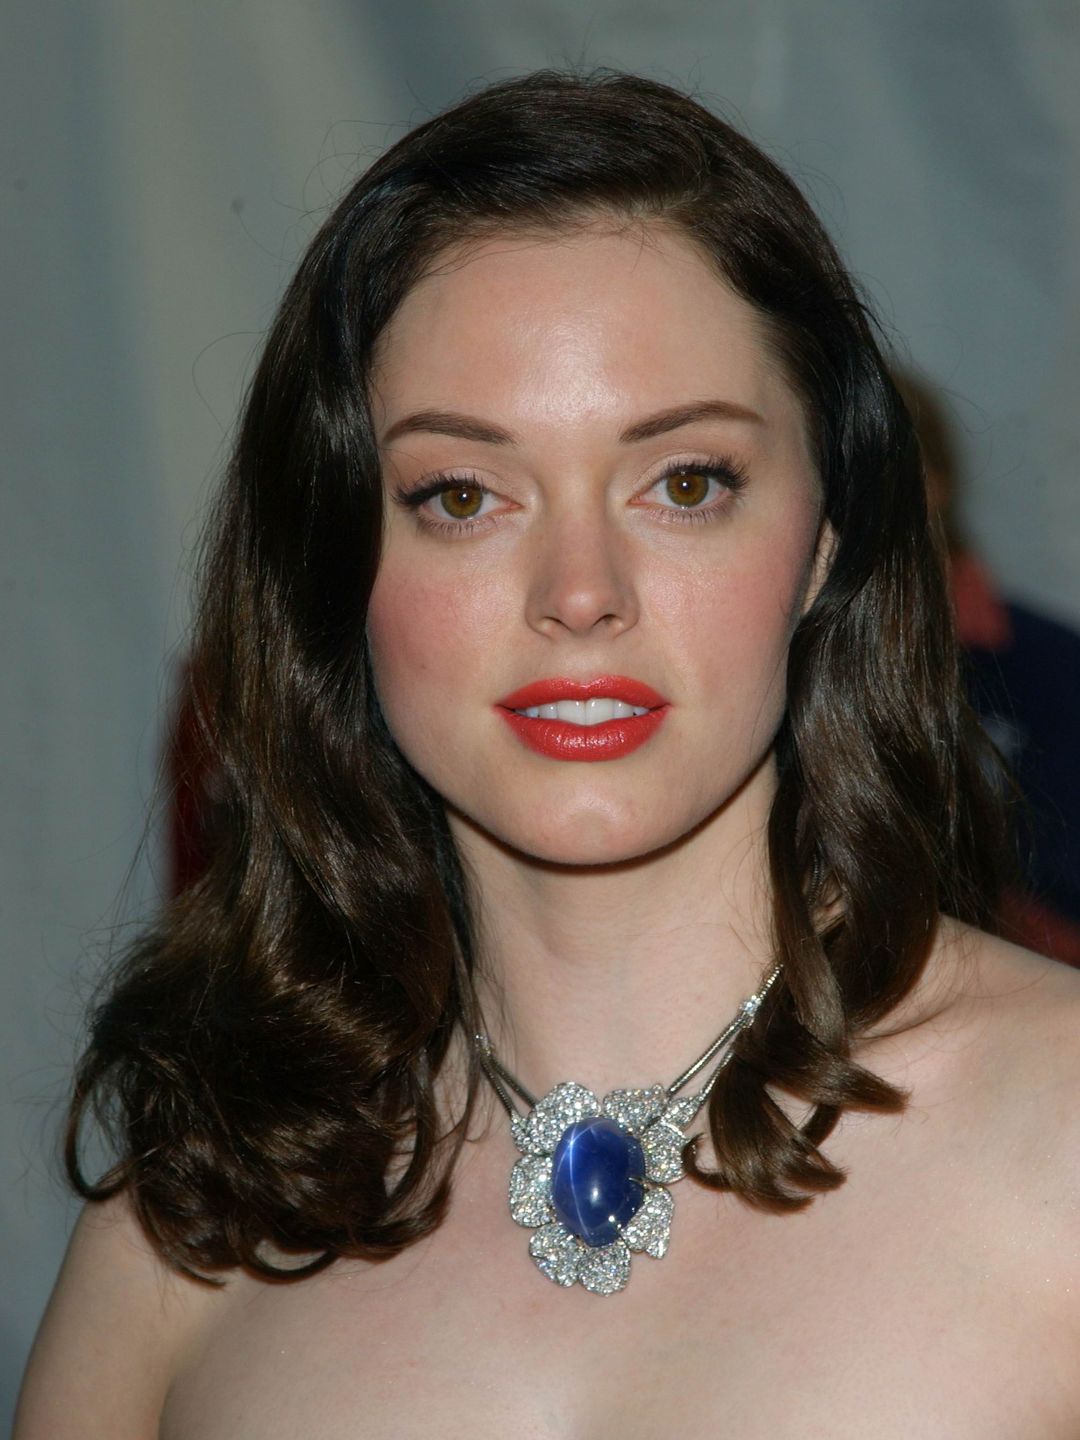 Rose McGowan in her youth